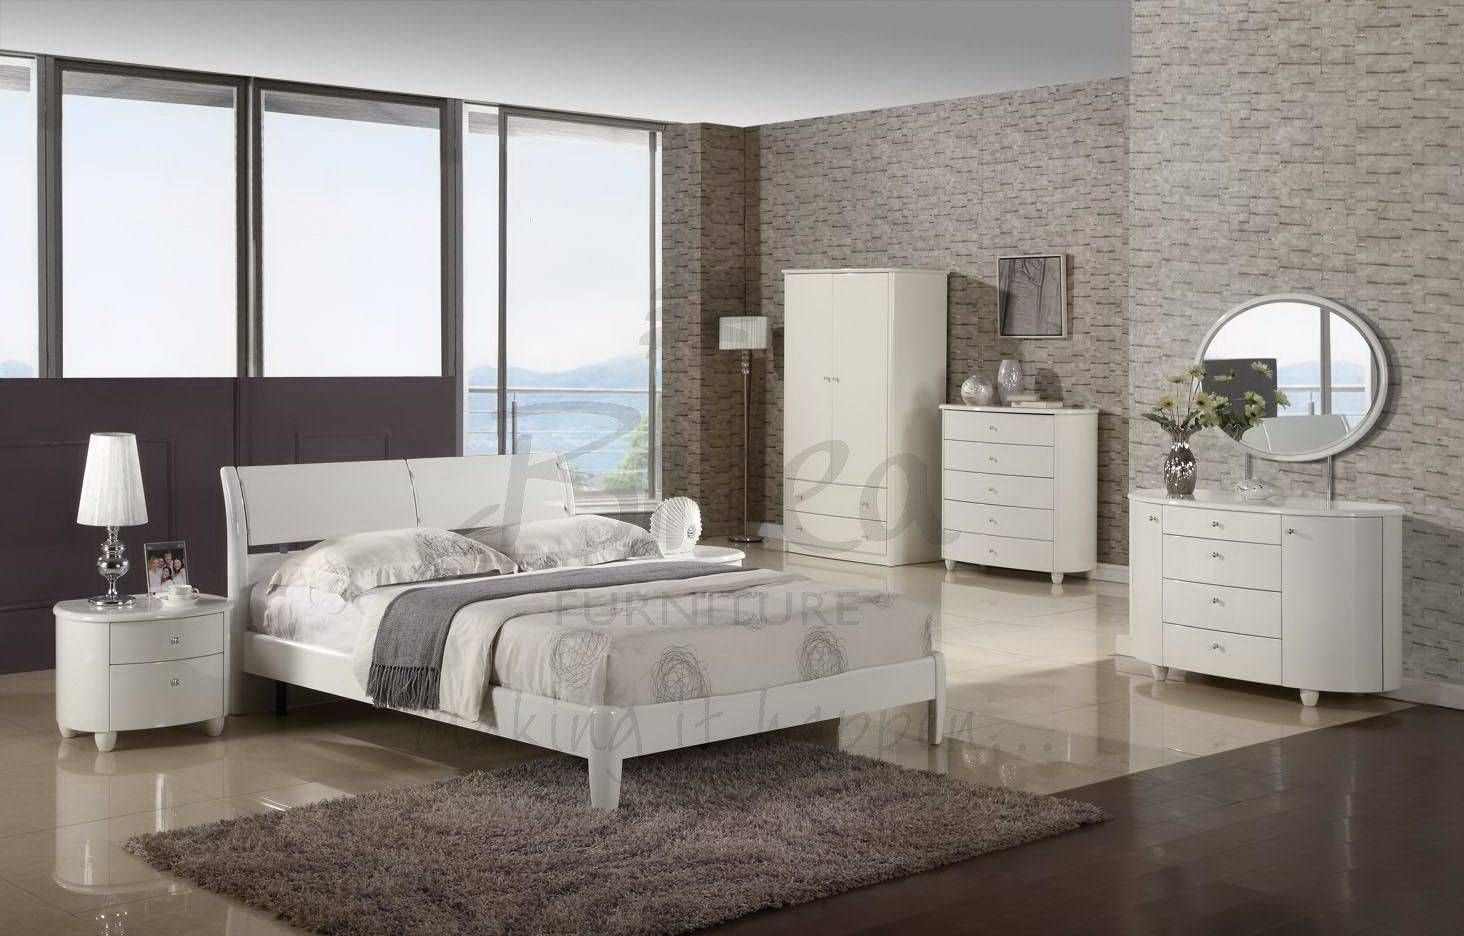 Ikea Wardrobes Pax Cream Gloss Bedroom Furniture With White High In Black Shiny Wardrobes (View 11 of 15)